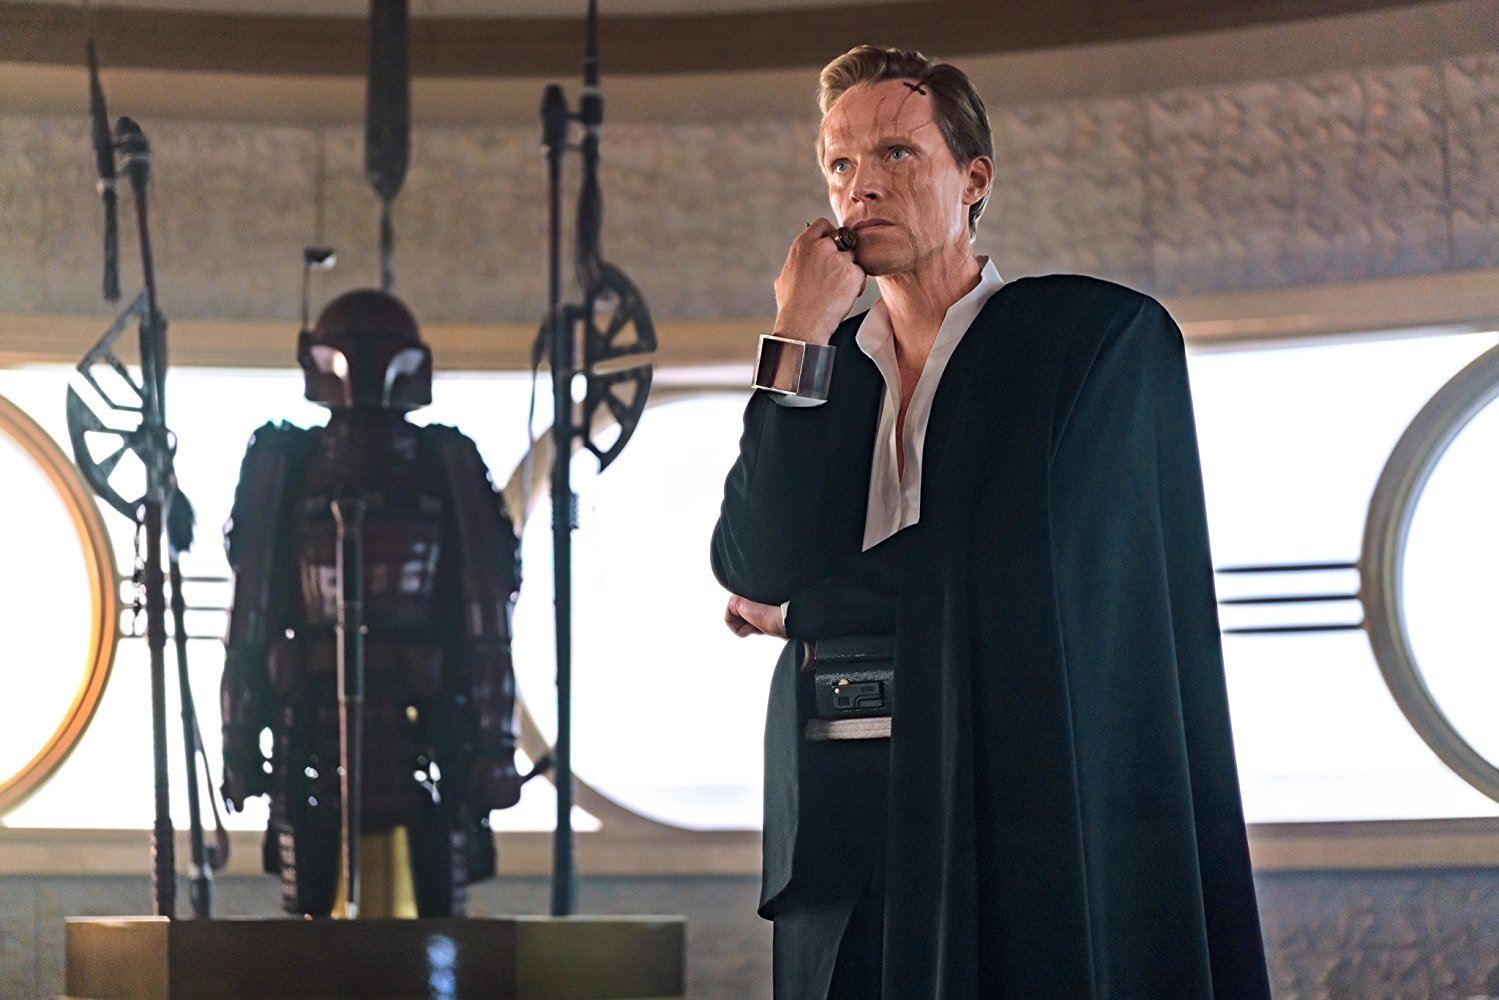 Paul Bettany as Dryden Vos in Solo: A Star Wars Story